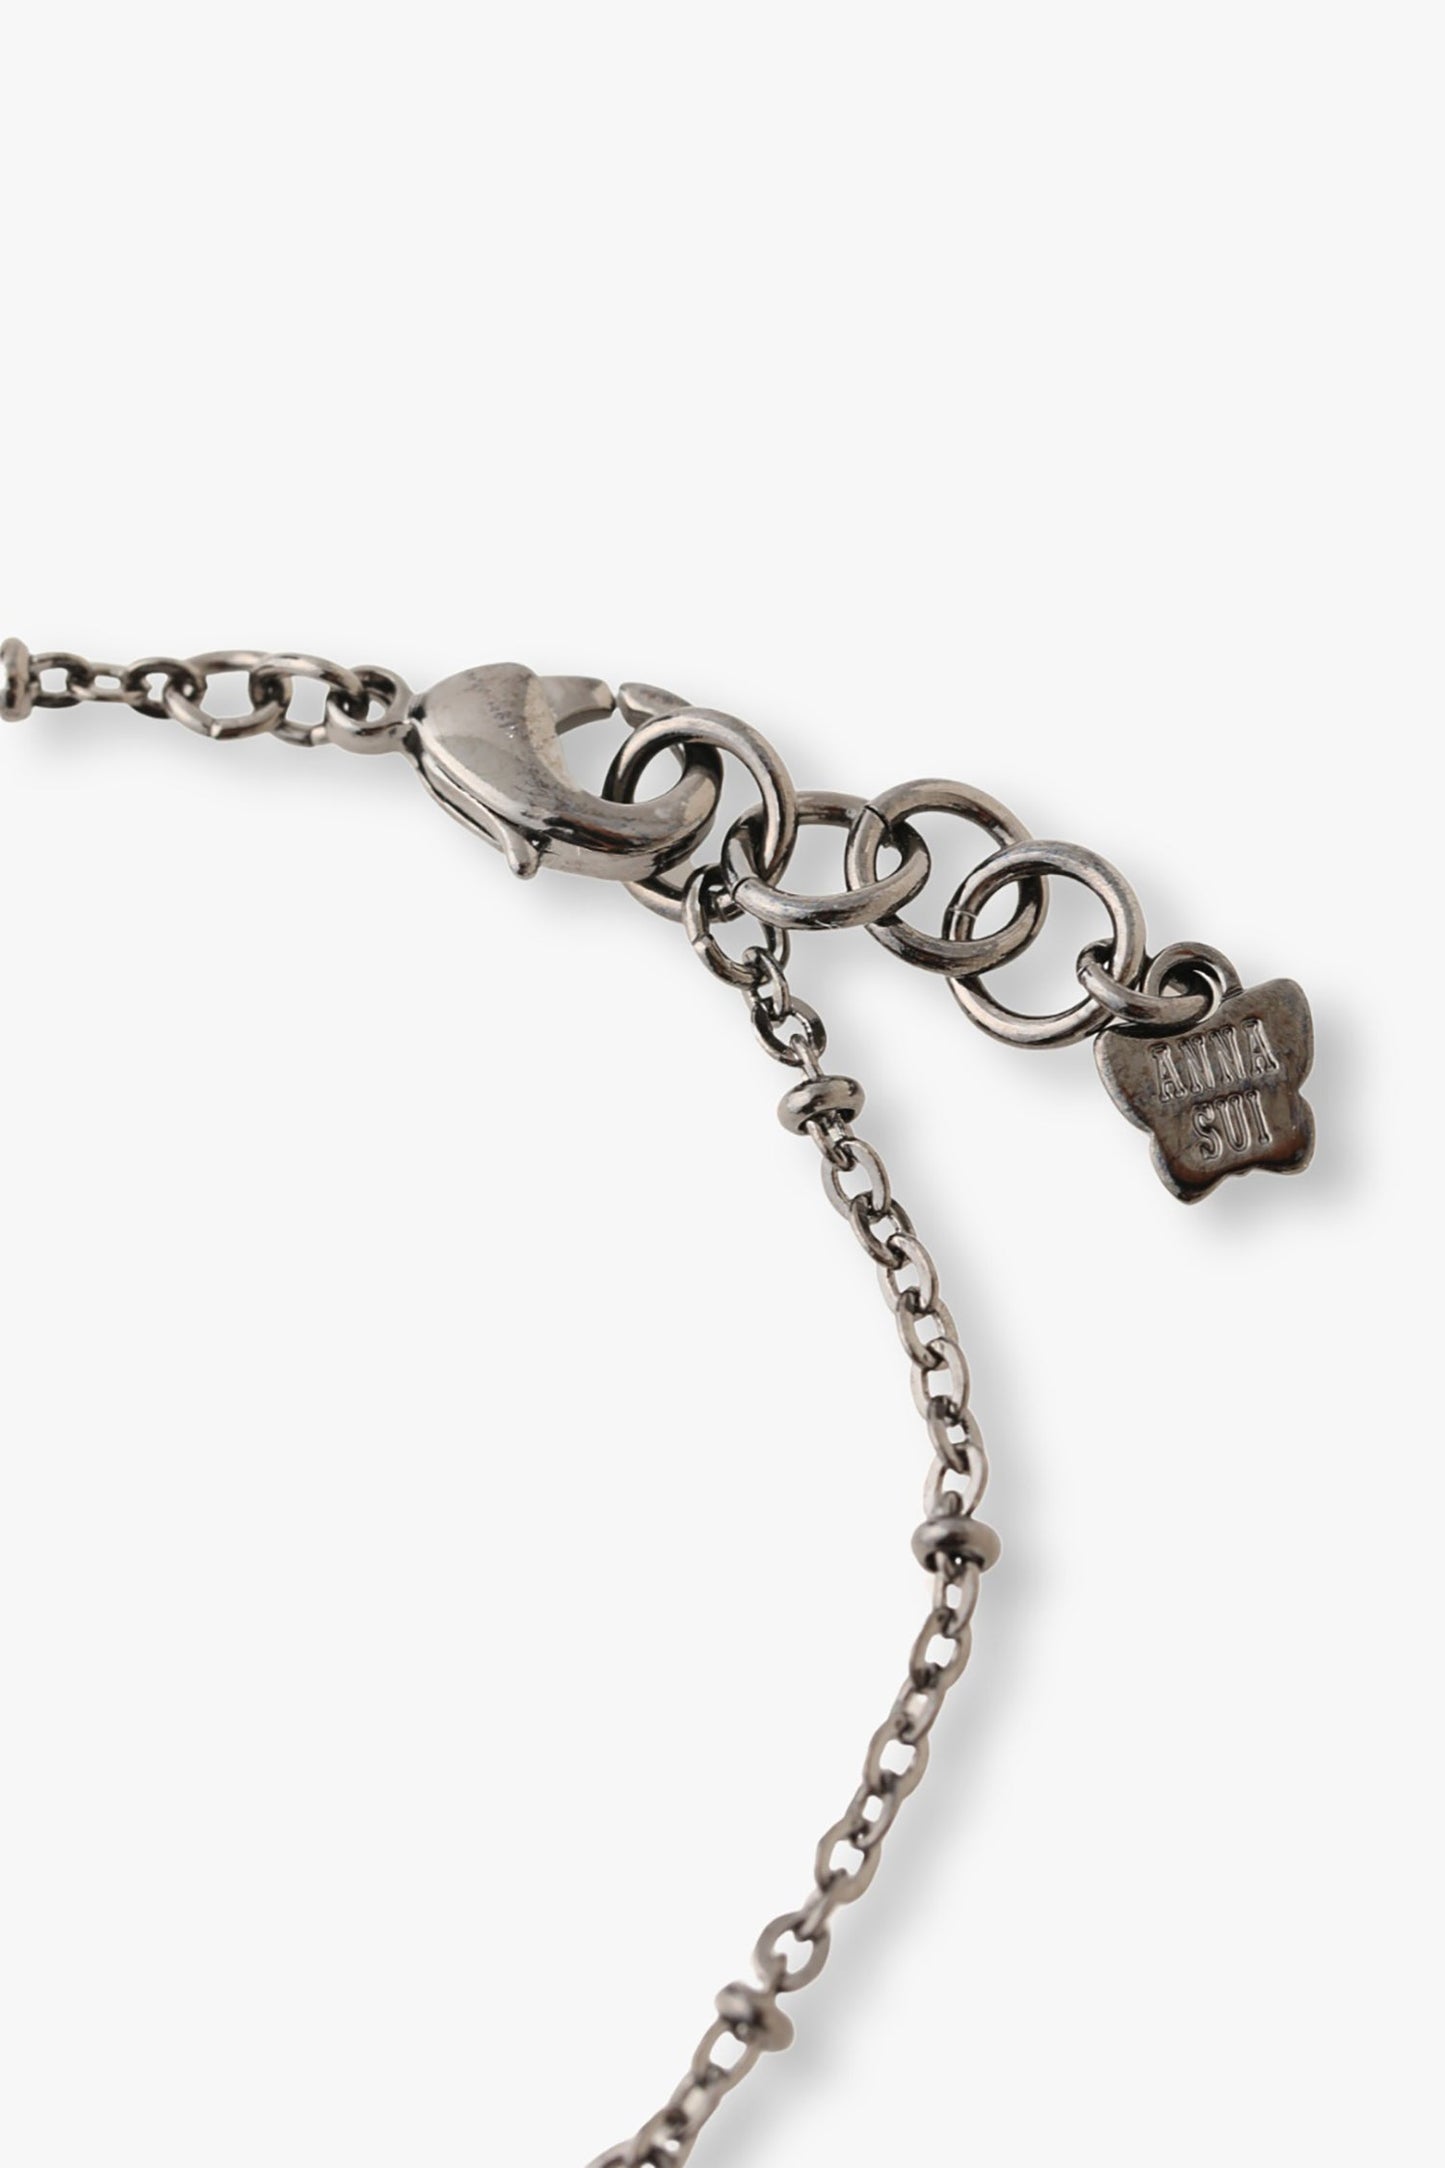 Gunmetal lobster claw clasp with large links for adjustability, Anna Sui imprint on a tag